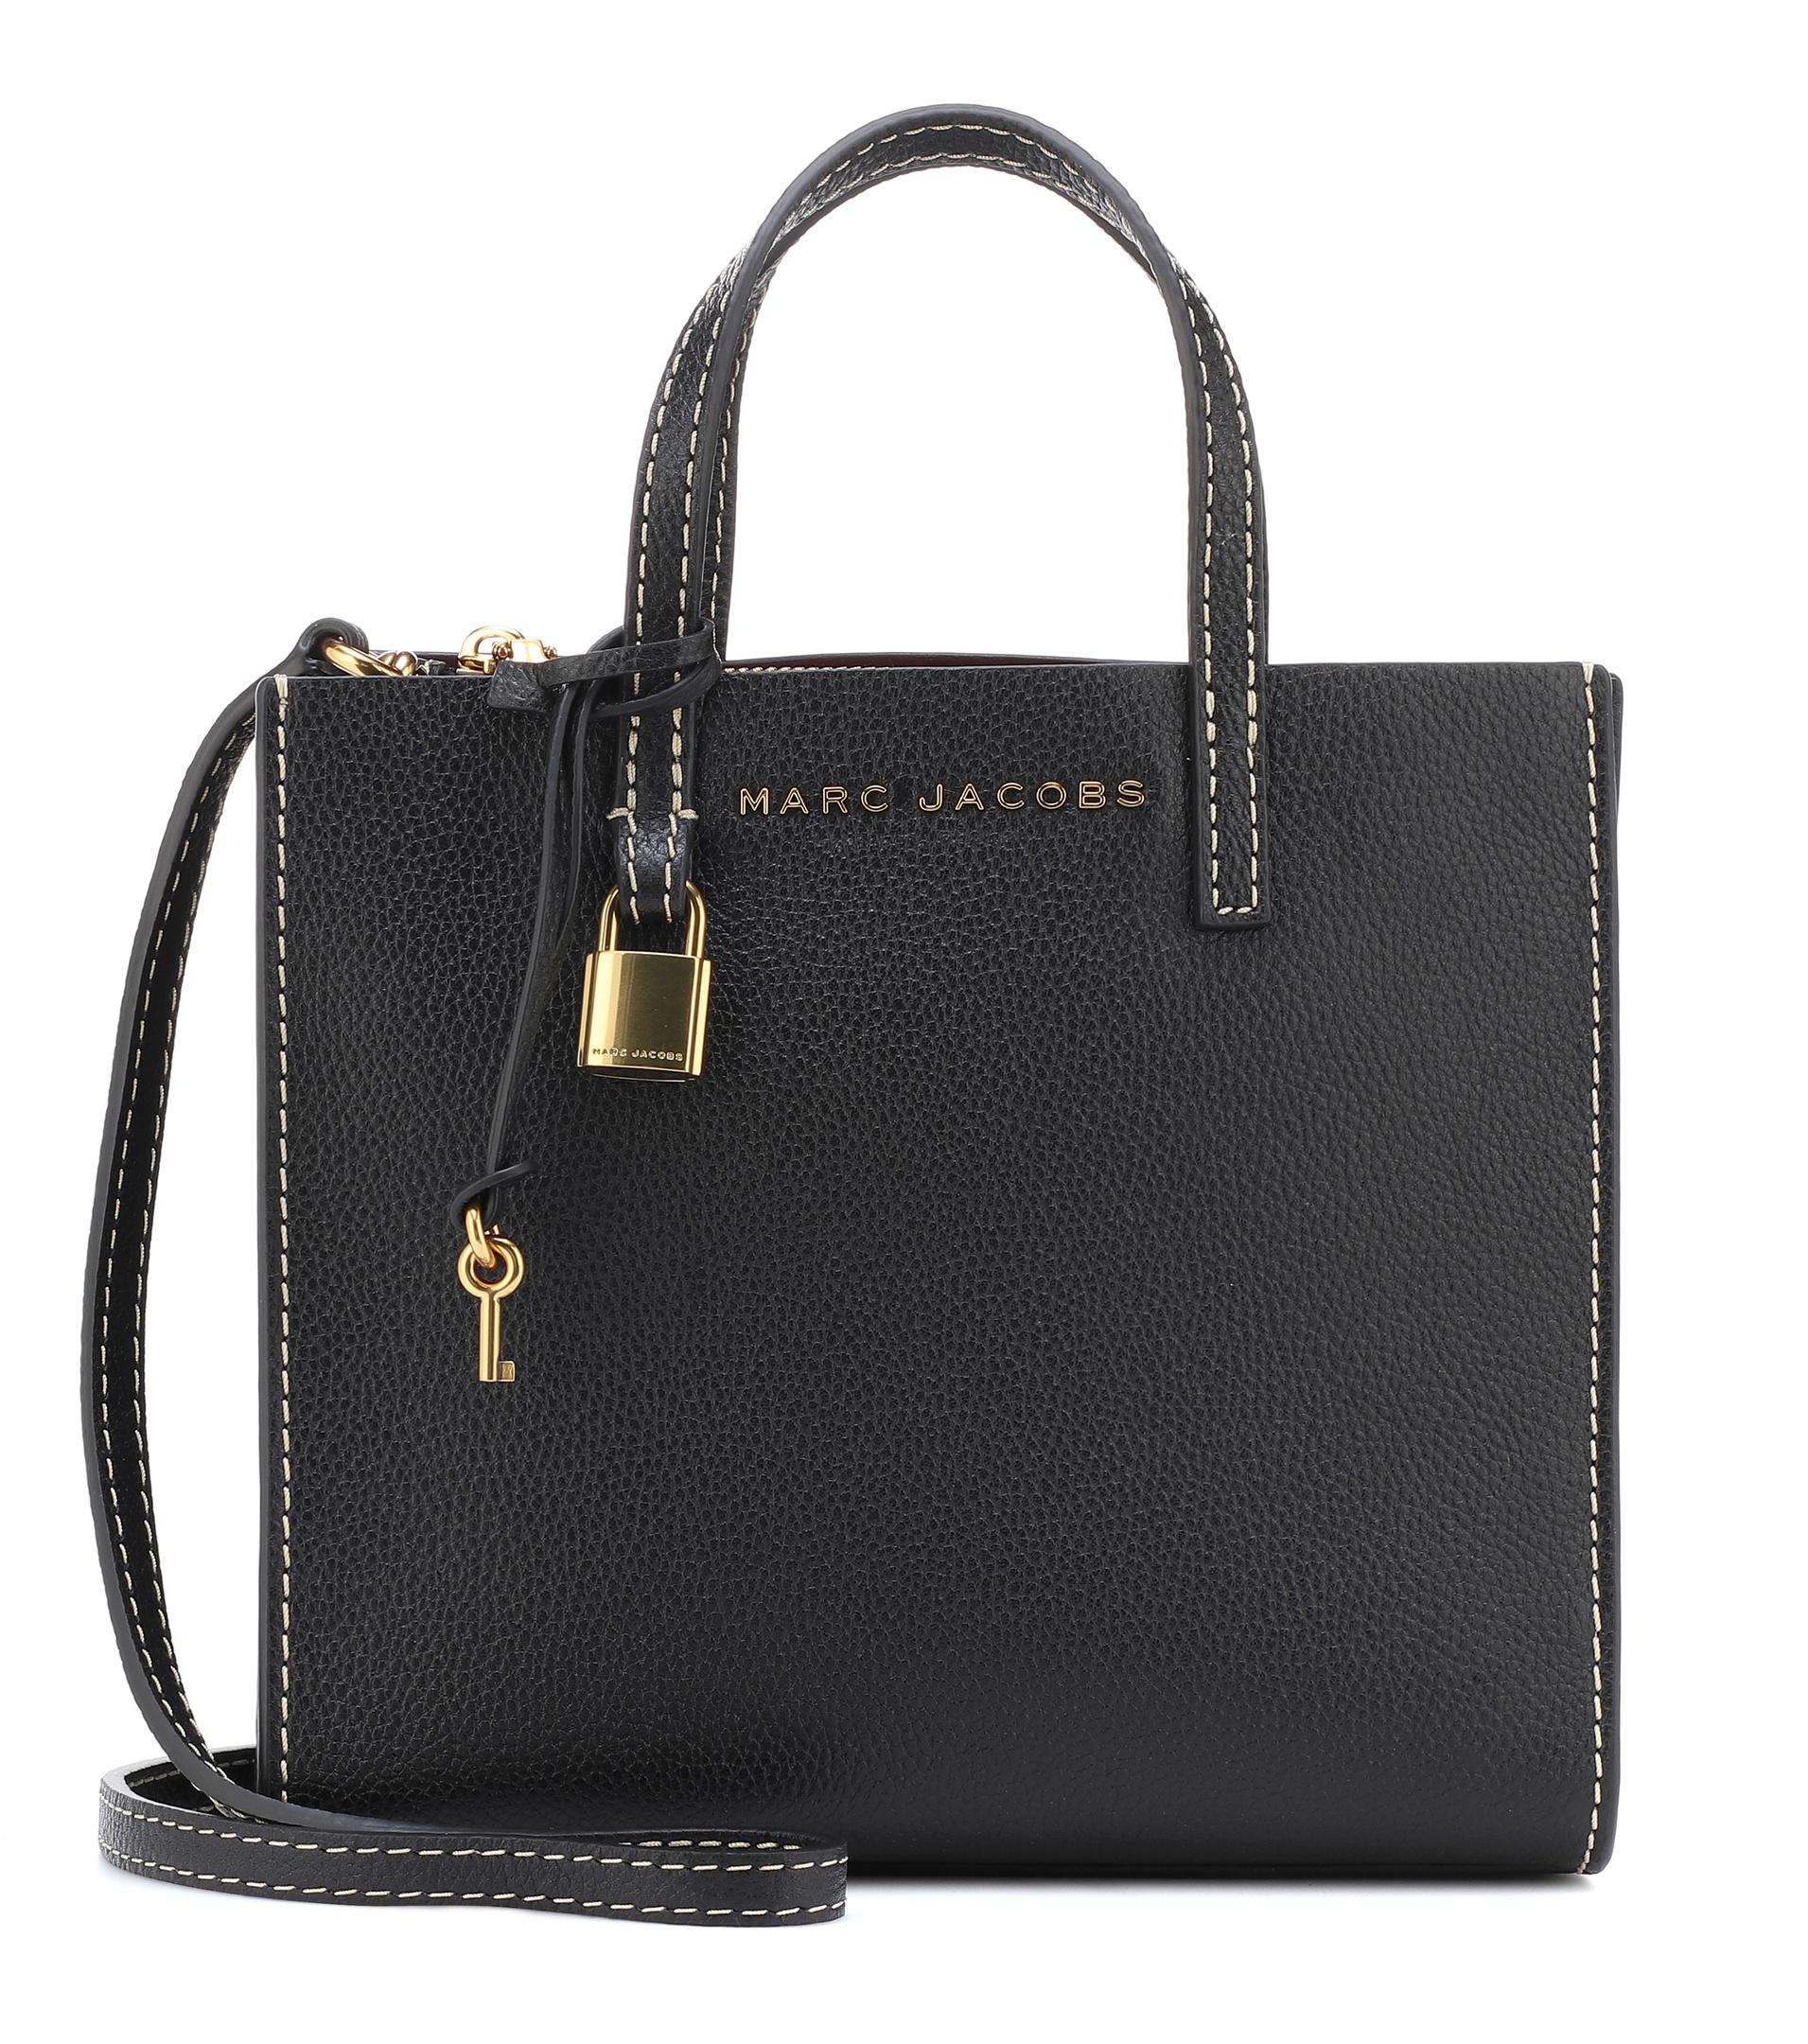 Marc Jacobs The Mini Grind Leather Tote in Black - Lyst